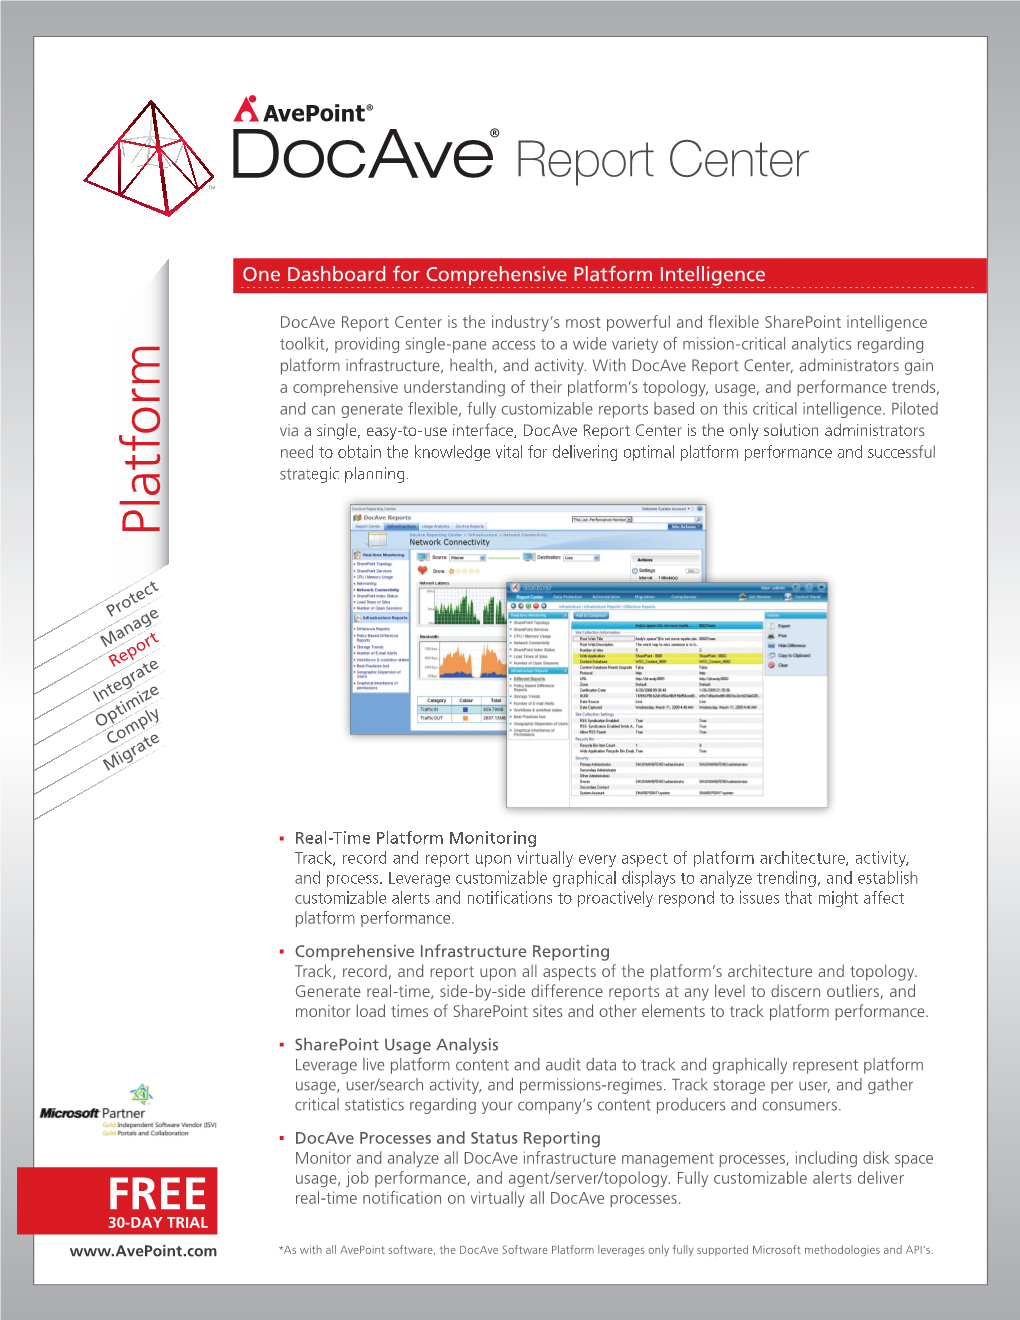 Docave Report Center US 20111202